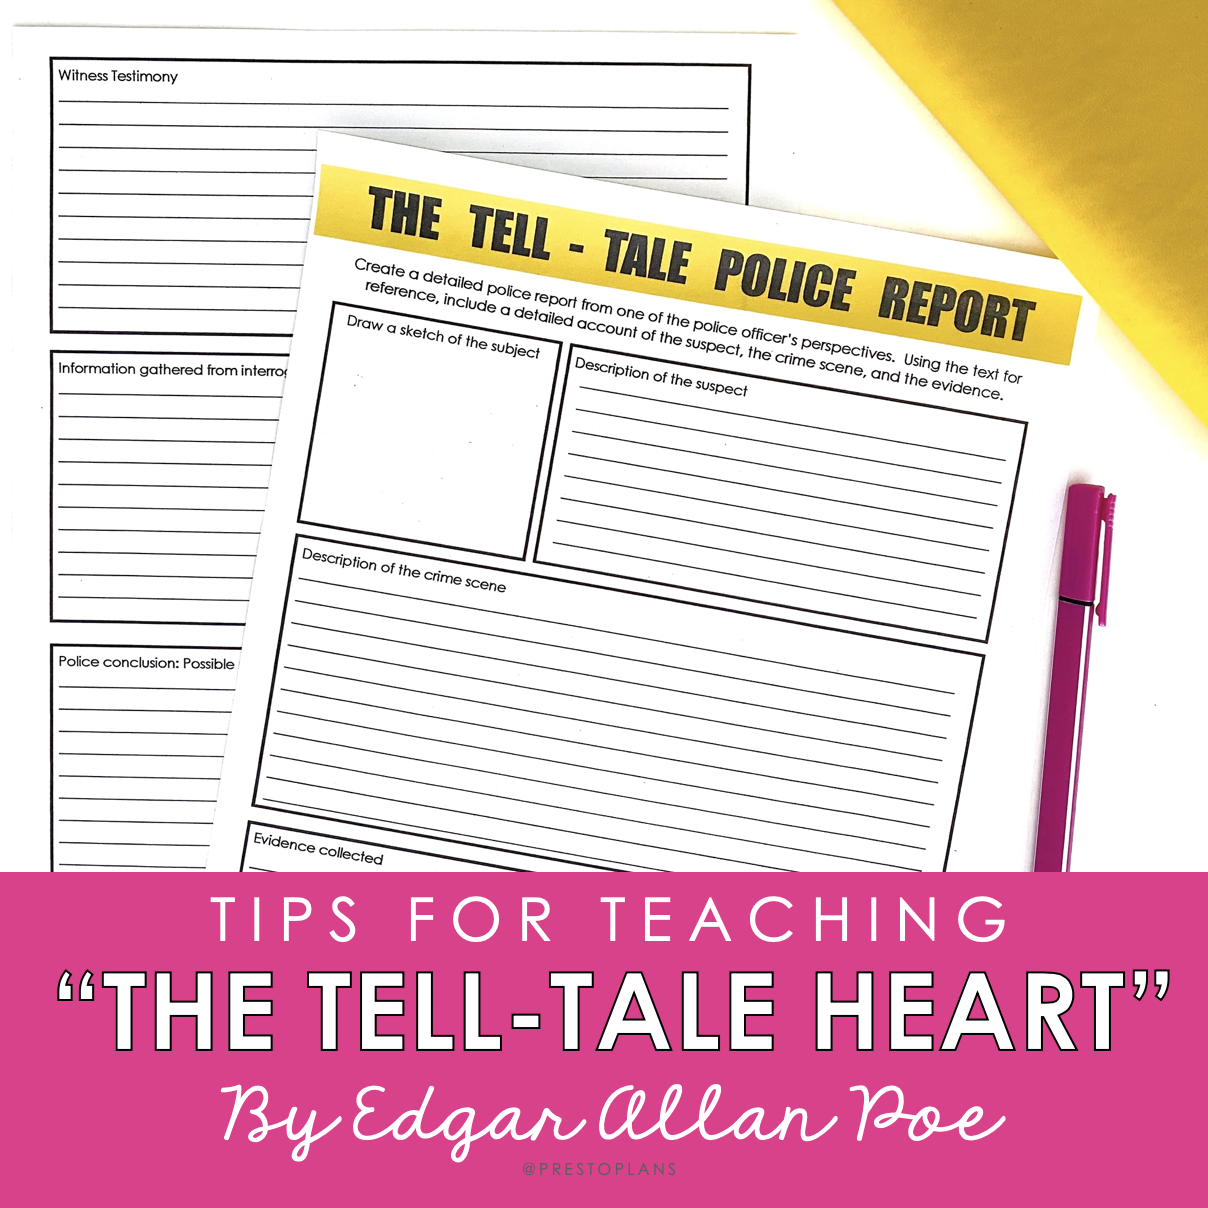 simile in the tell tale heart